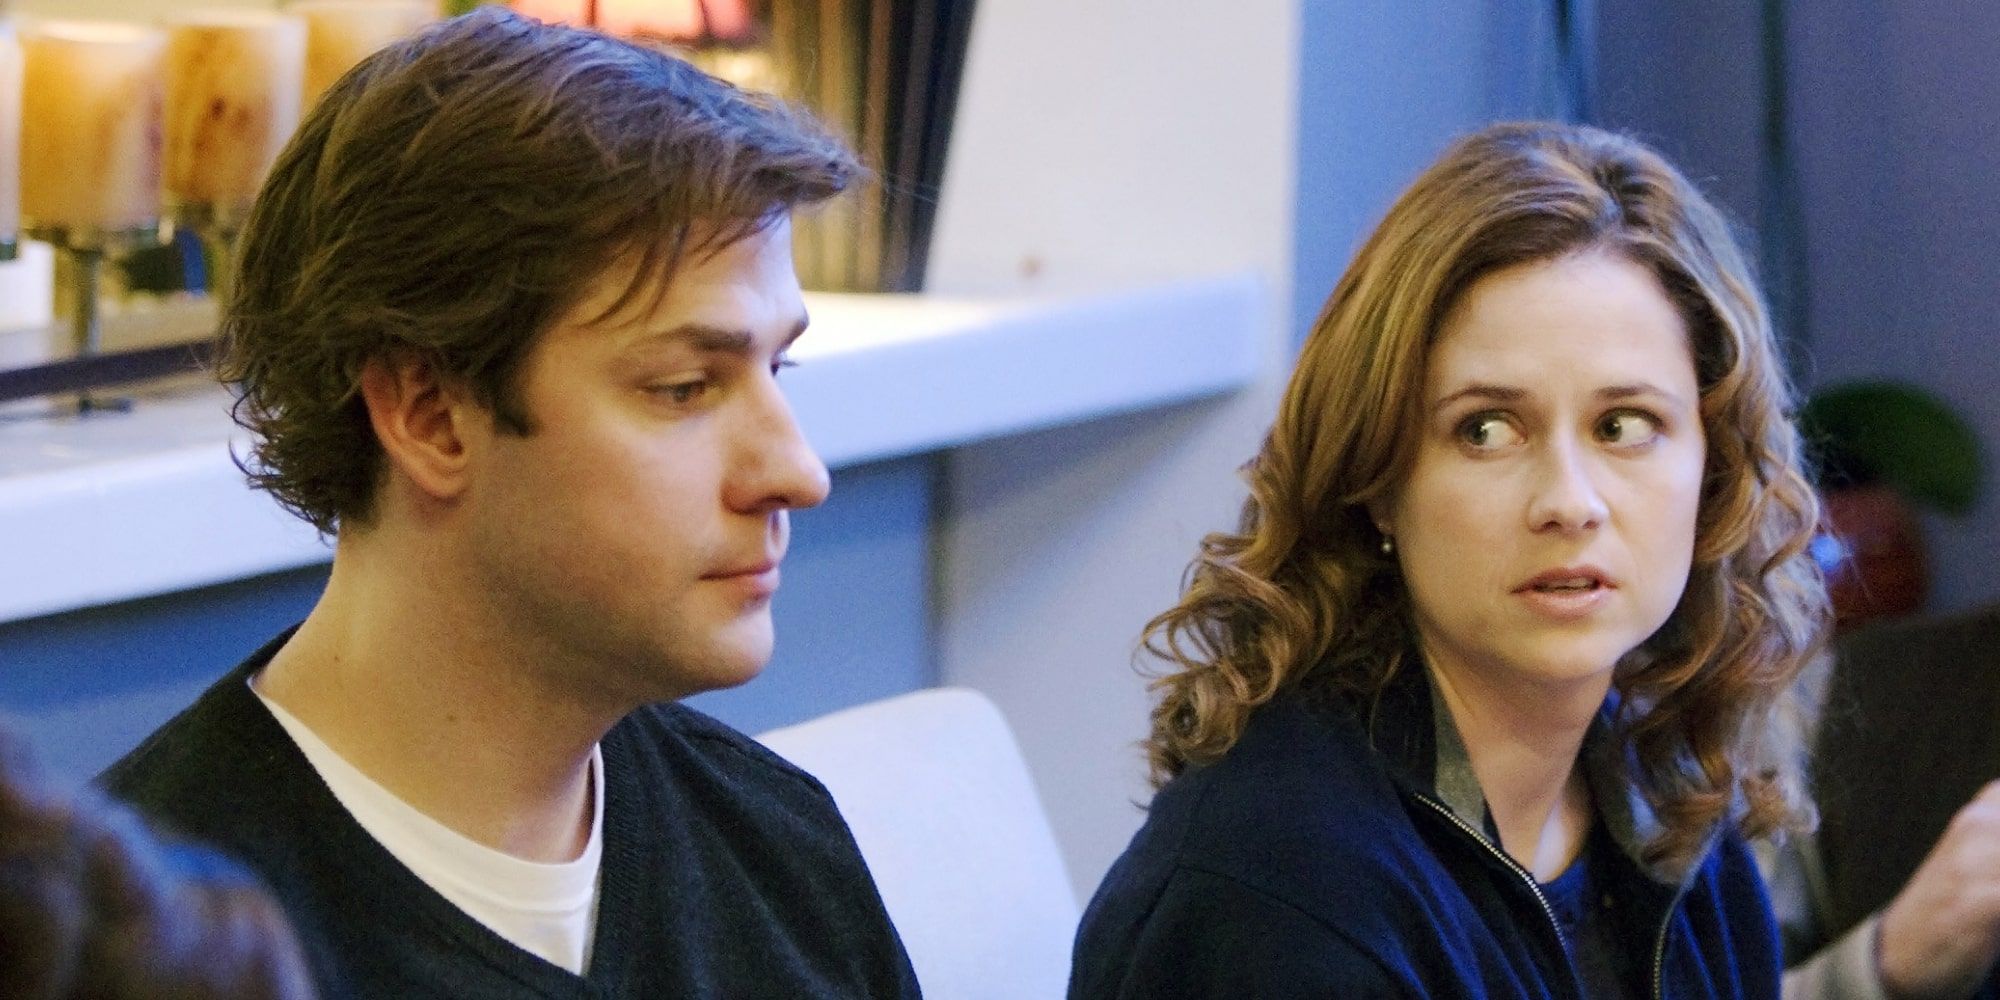 Jim and Pam looking upset in &quot;The Dinner Party&quot; episode of The Office